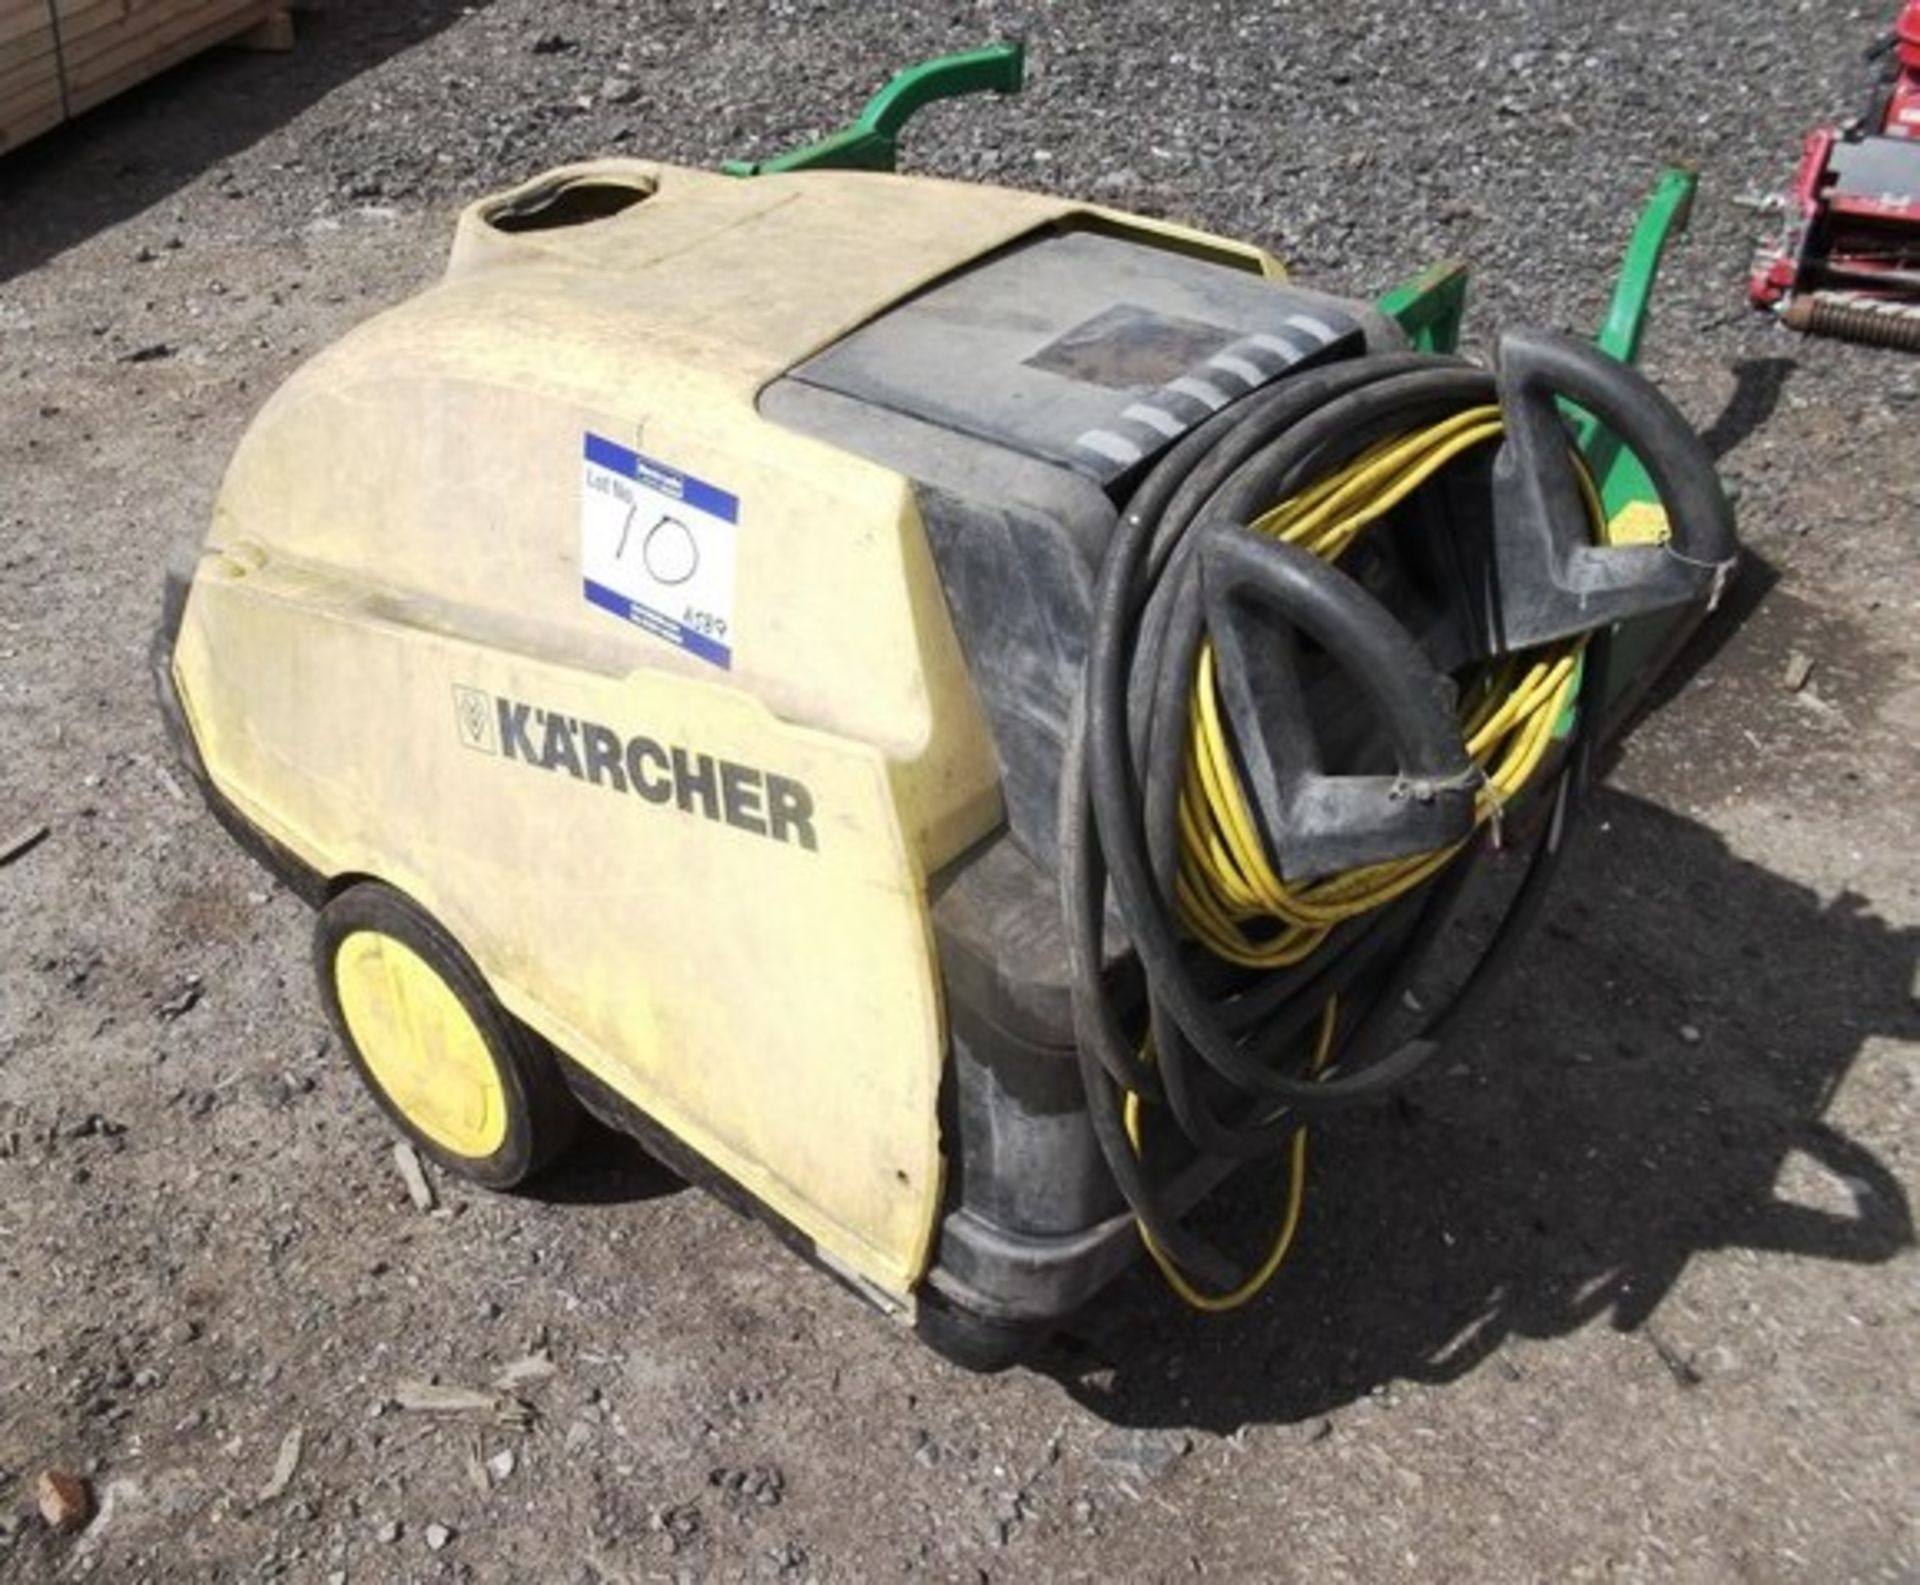 KARCHER HDS745 HOT WATER PRESSURE WASHER (6 BAR), SN 028058, NO LANCE*DIRECT FROM COUNCIL*